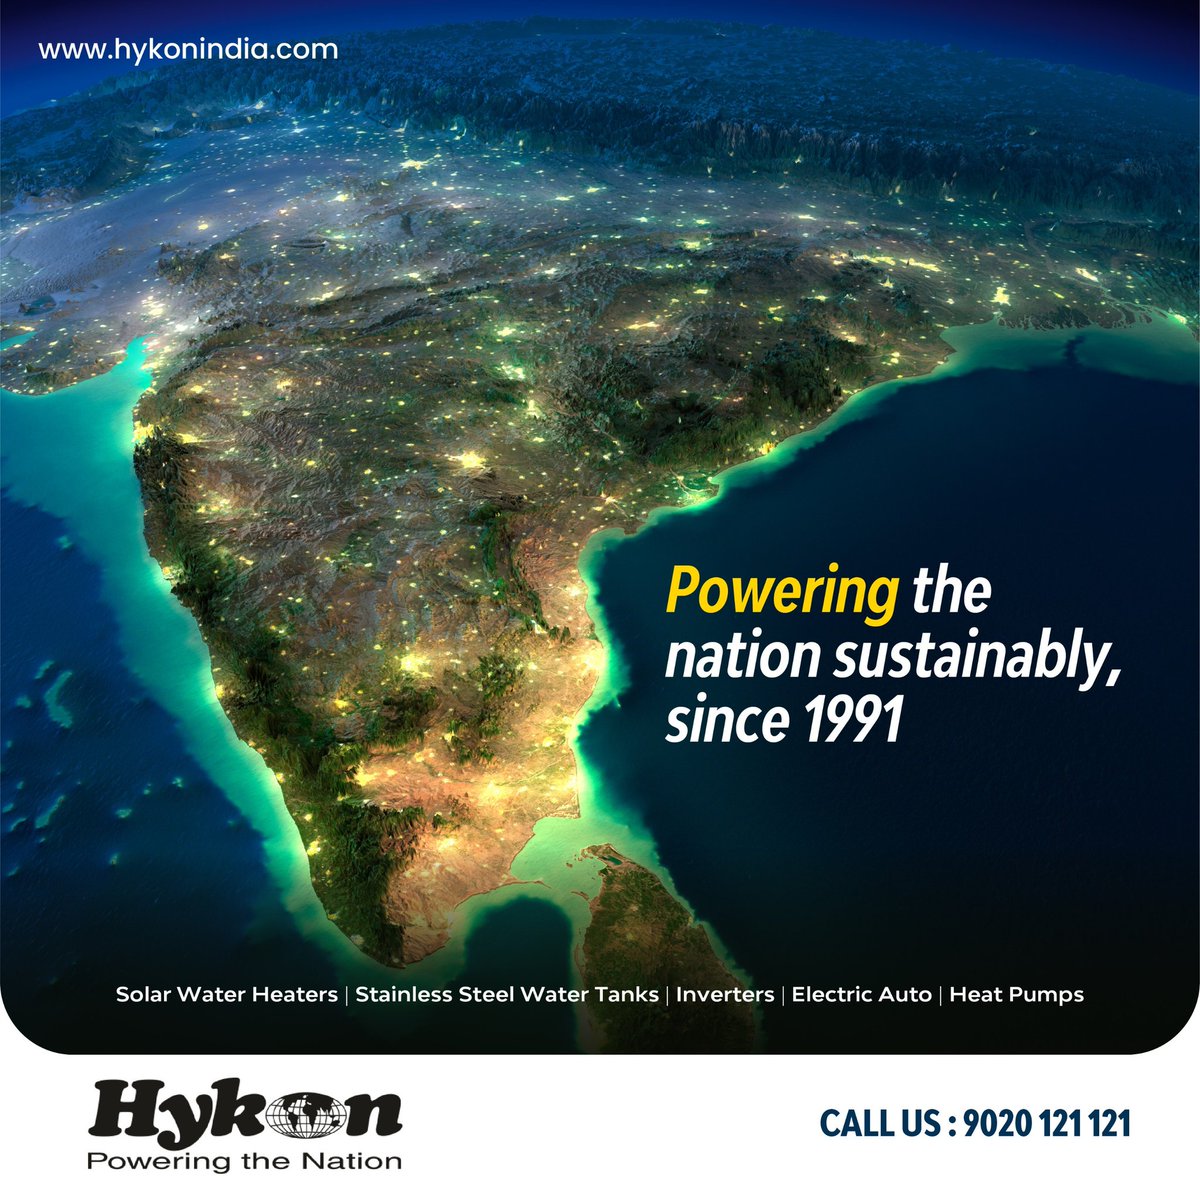 Hykon has been lighting up lives for over 30 years. Now we are taking a step towards a sustainable future. Join us on this journey to power up the nation.

#SolarWaterHeater #SolarEnergy  #stainlesssteelltank #inverter #electricauto #HeatPump  #HykonIndiaLimited